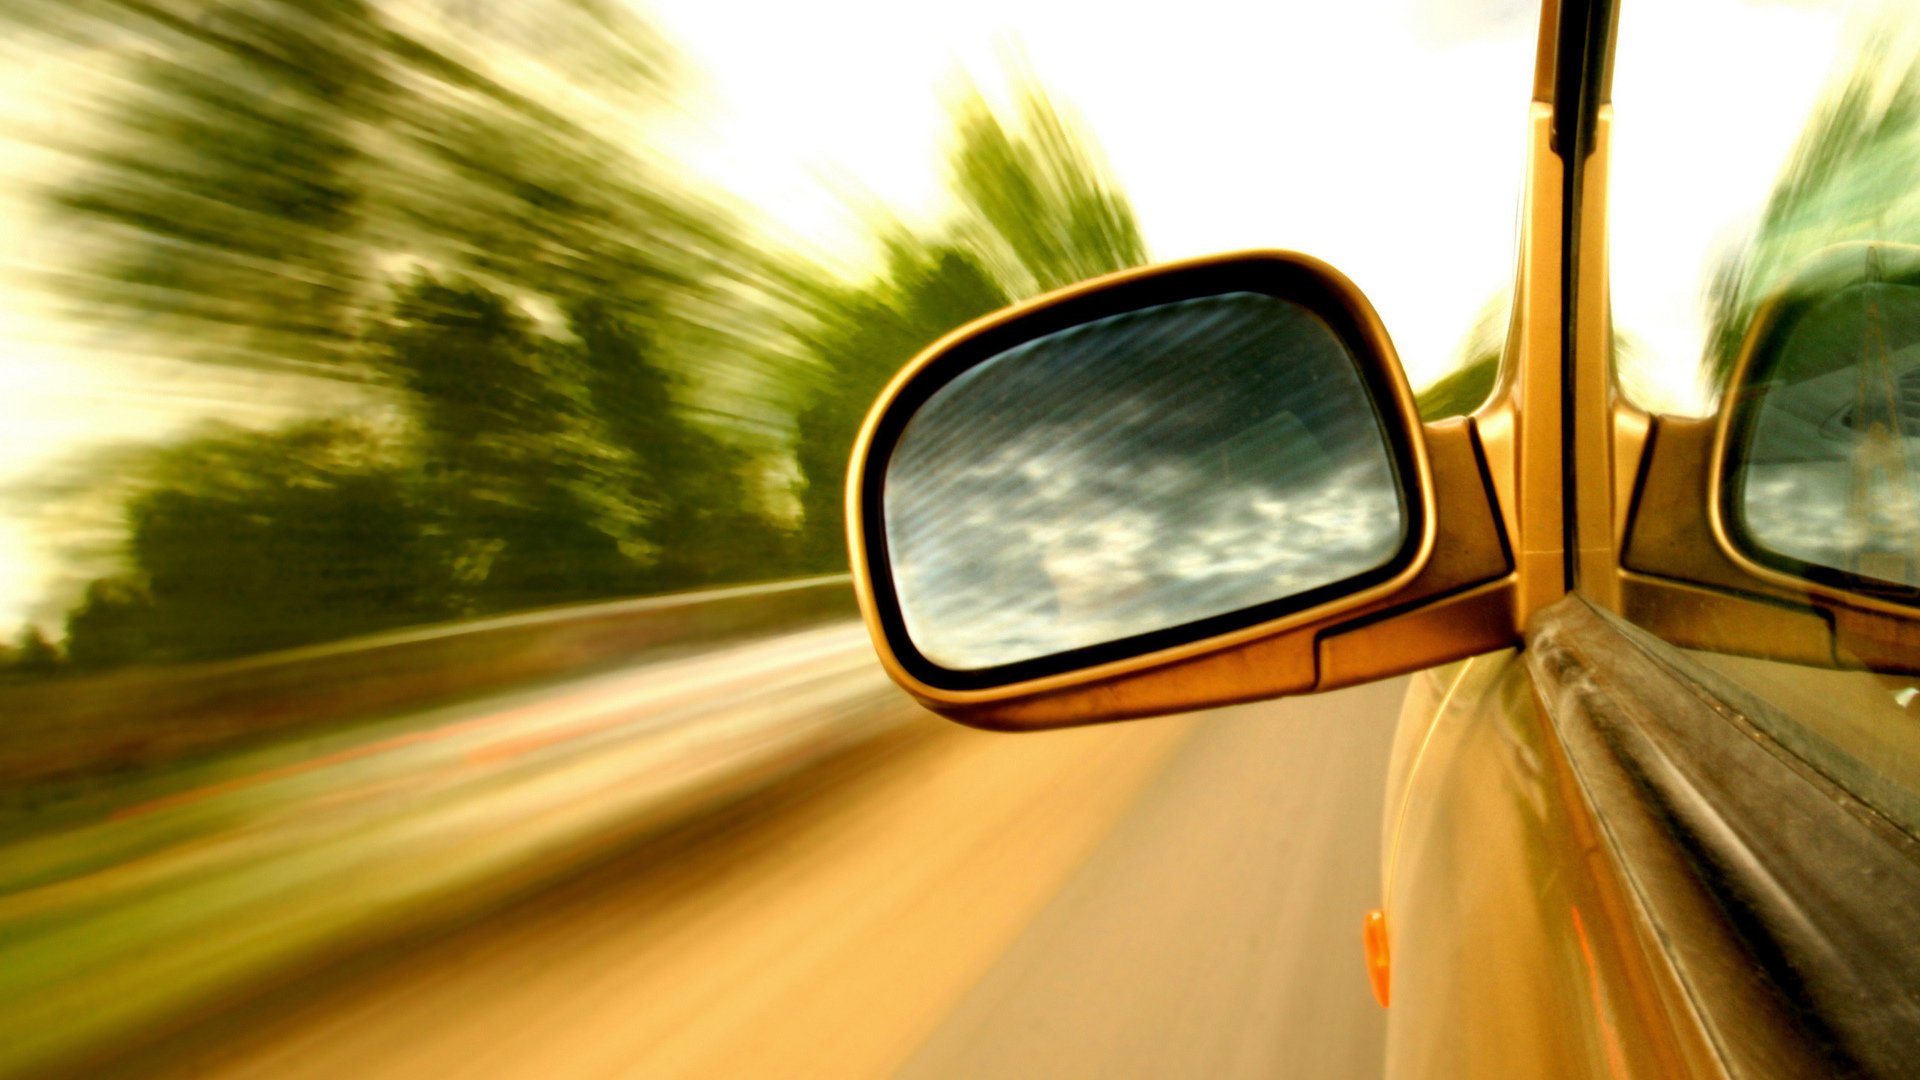 mirror, Car, Side view, Reflection, Clouds, Road, Lines, Motion blur ...